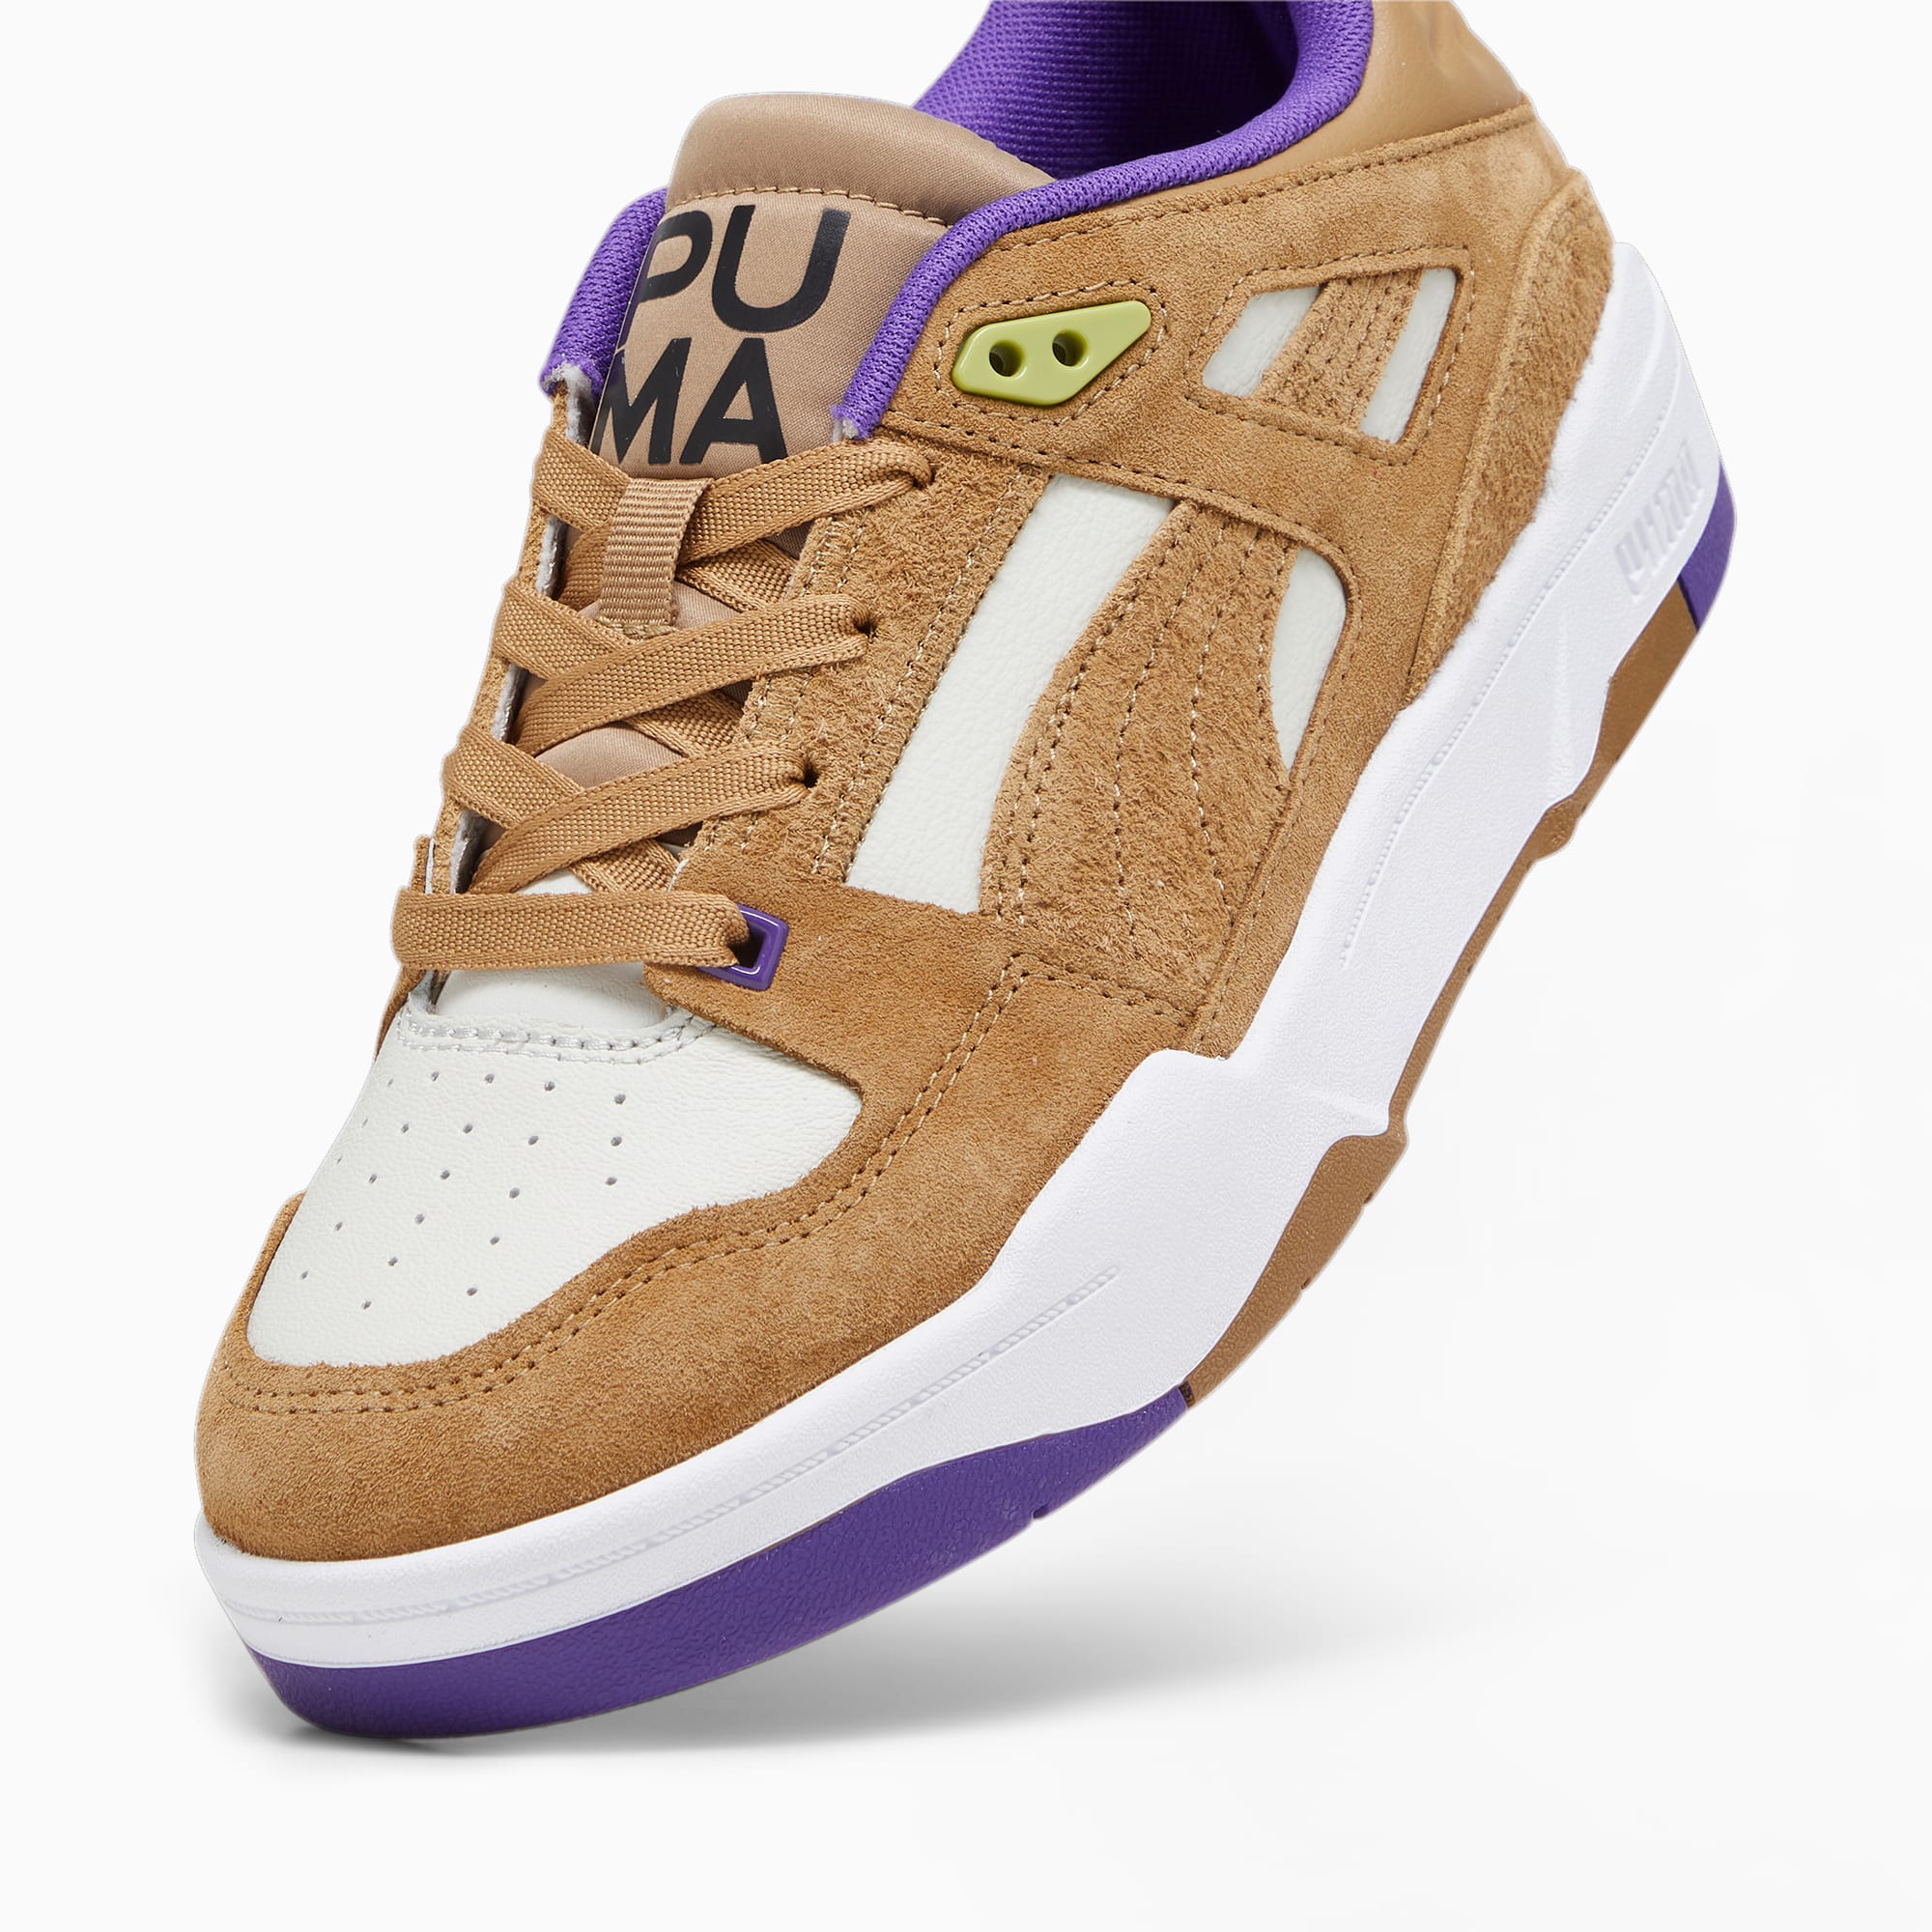 PUMA Slipstream Infuse Women's Sneakers, Toasted/White